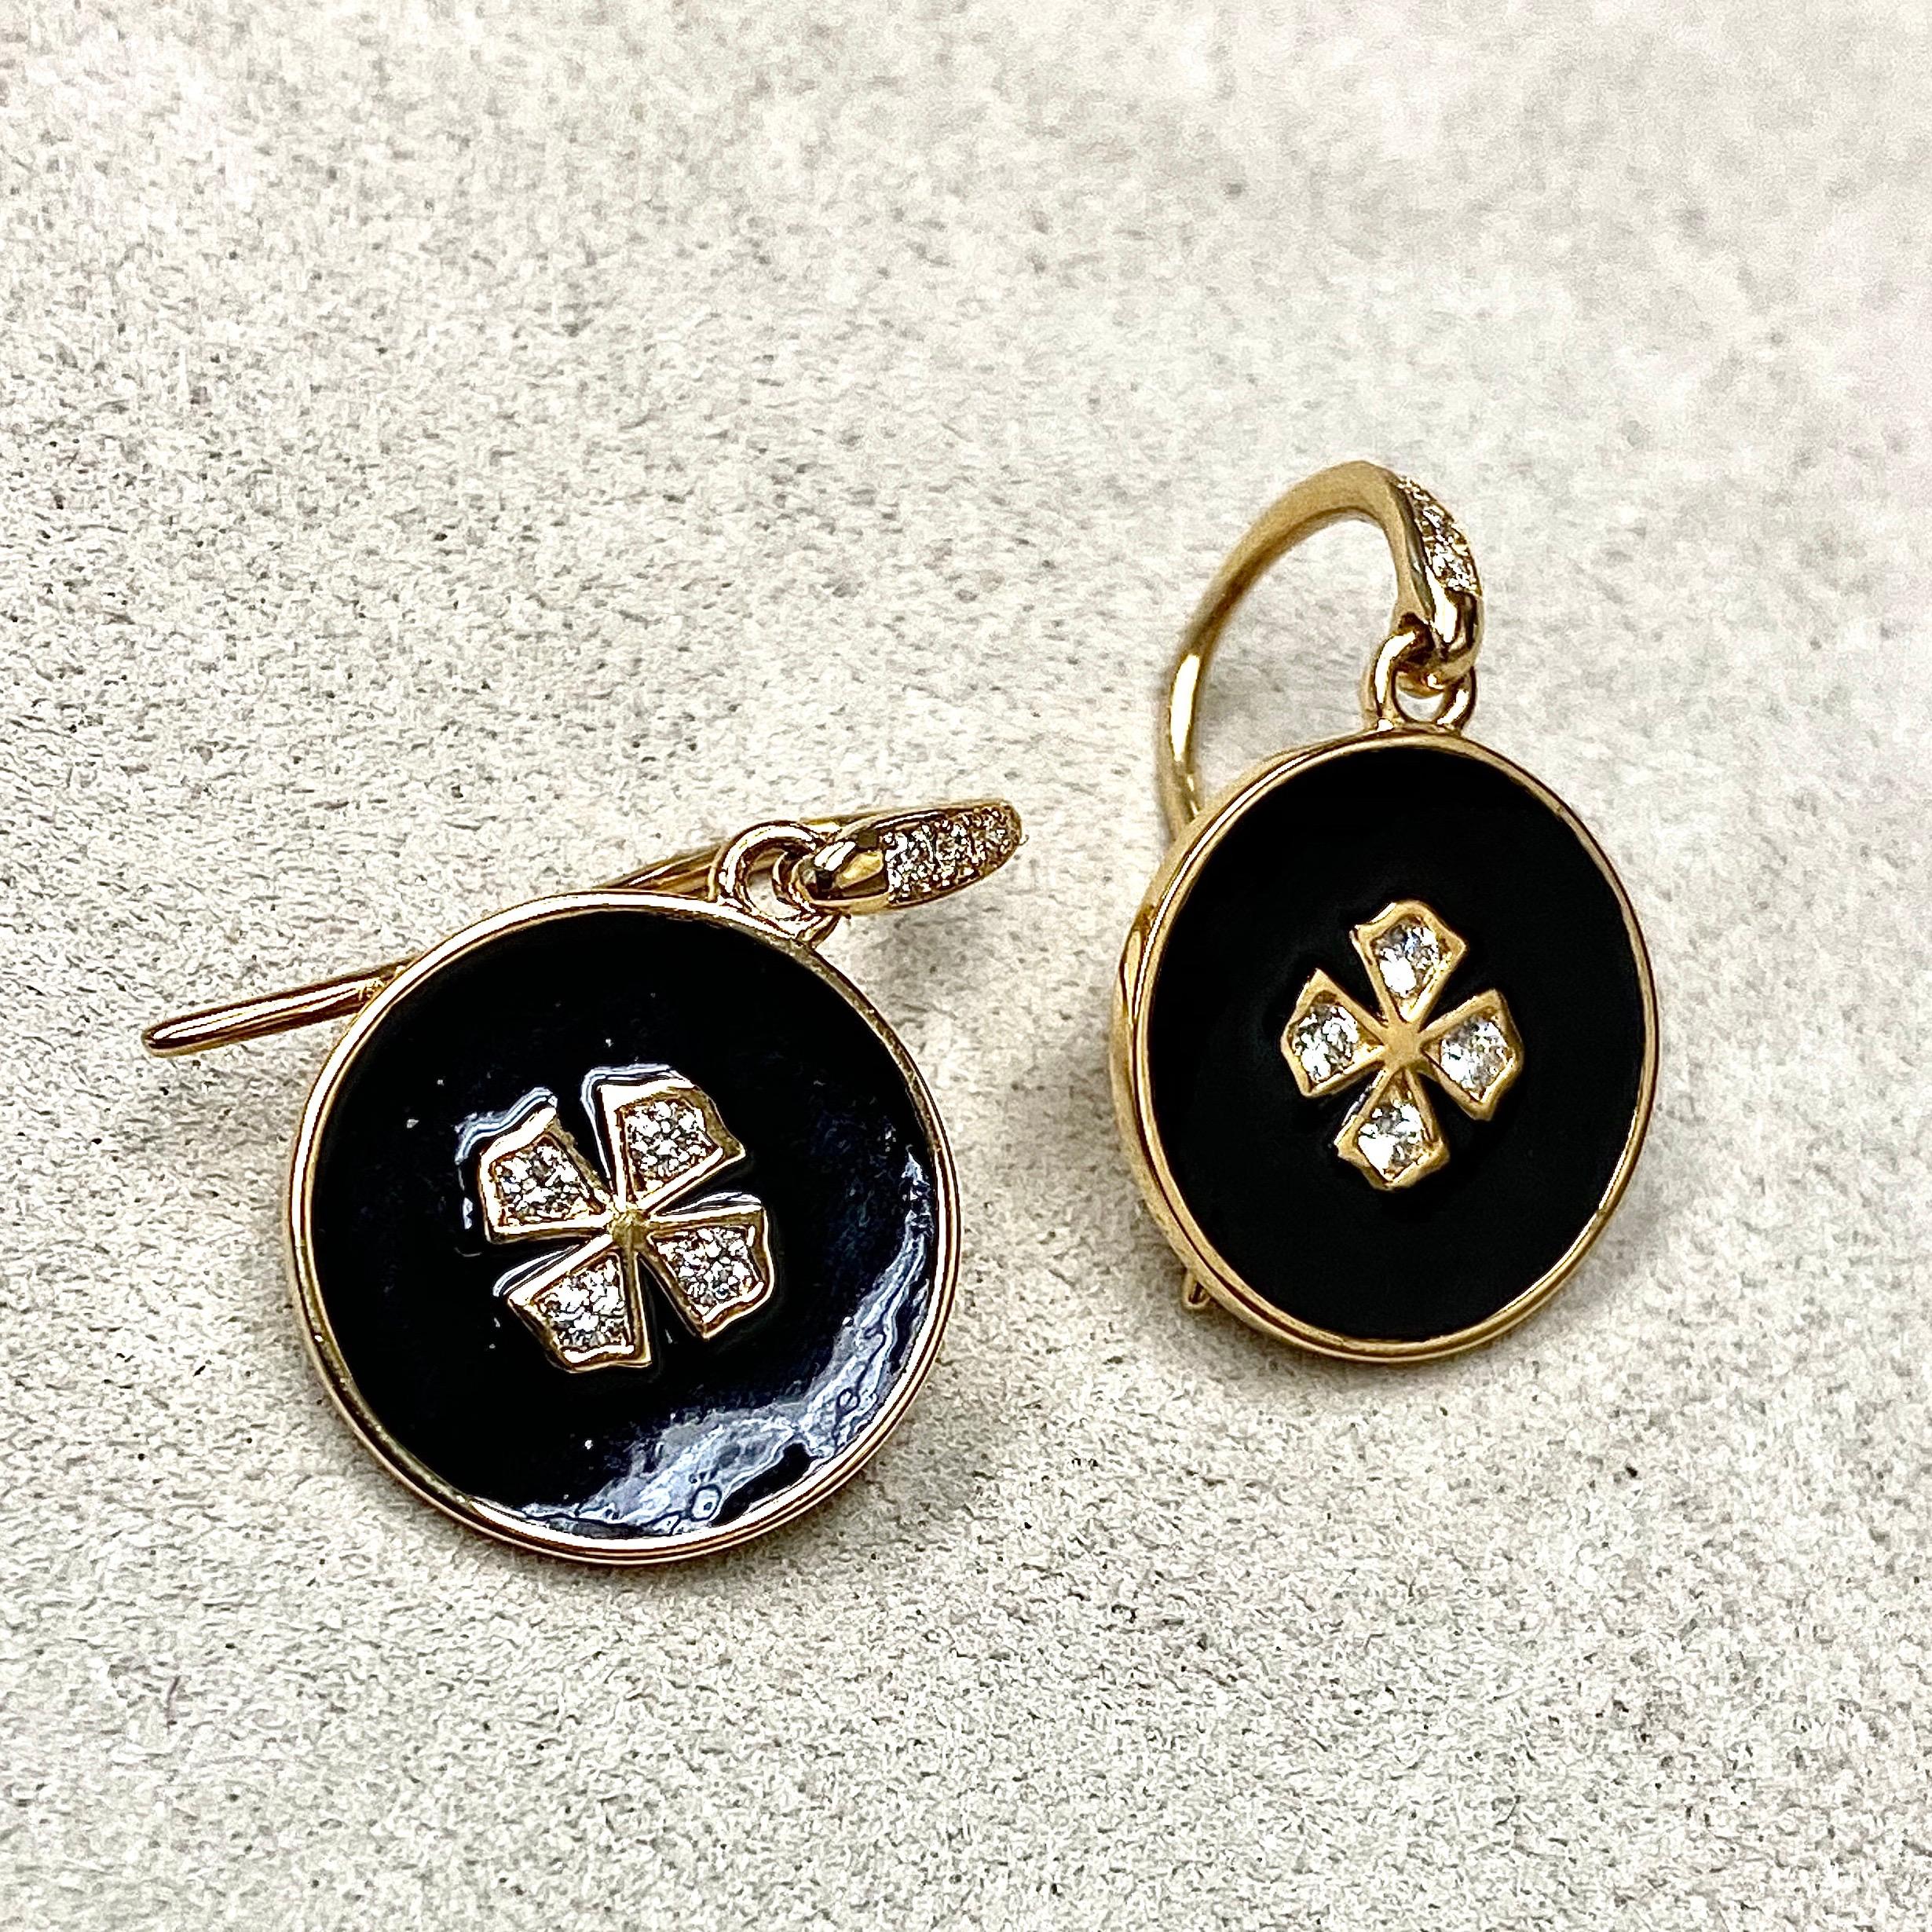 Created in 18 karat yellow gold
Champagne diamonds 0.15 ct
Black enamel
Limited edition


About the Designers

Drawing inspiration from little things, Dharmesh & Namrata Kothari have created an extraordinary and refreshing collection of luxurious